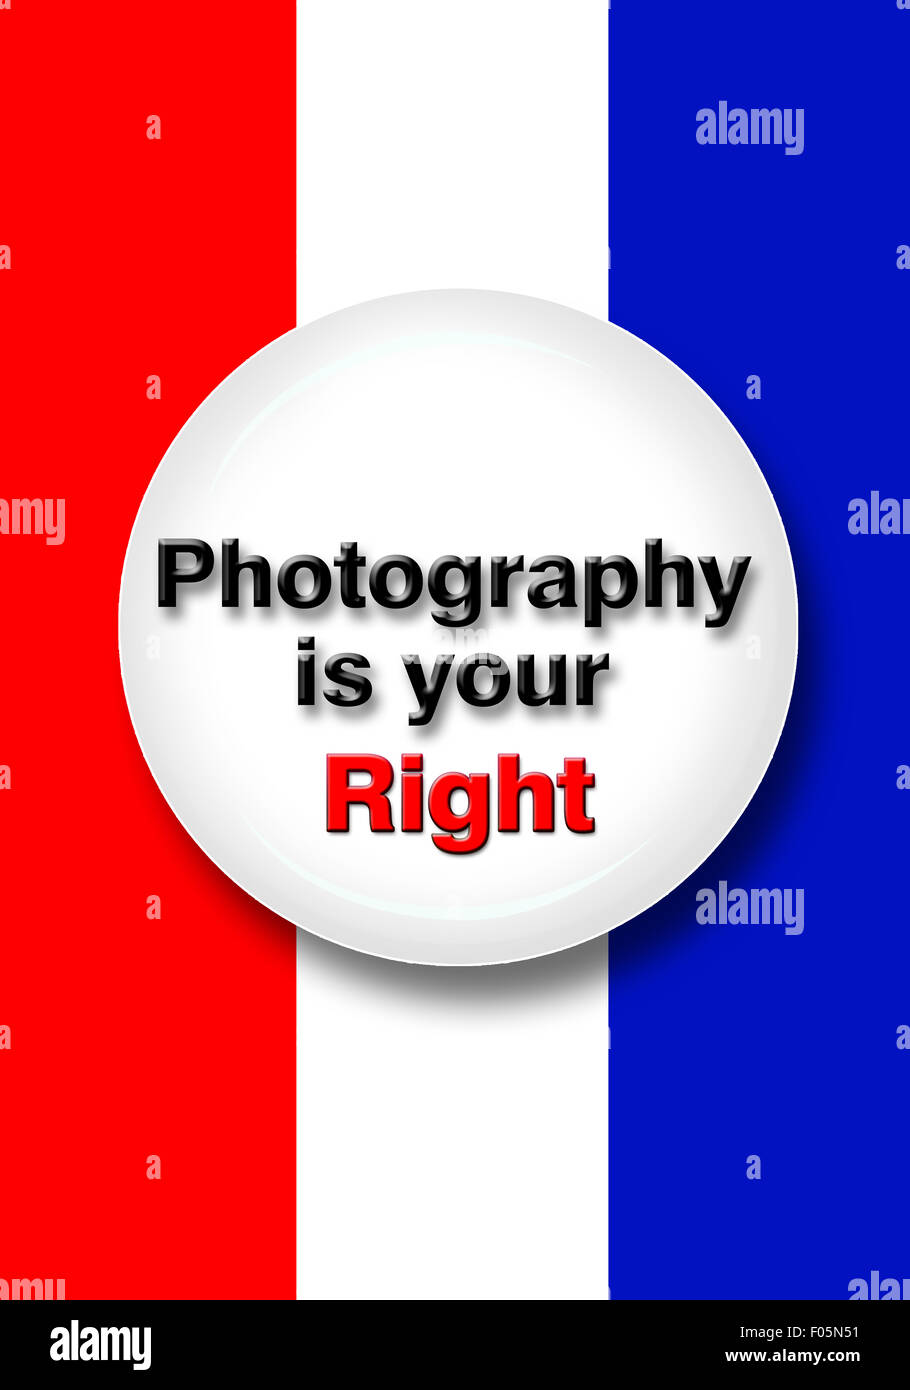 Photography is your right as an American. Stock Photo